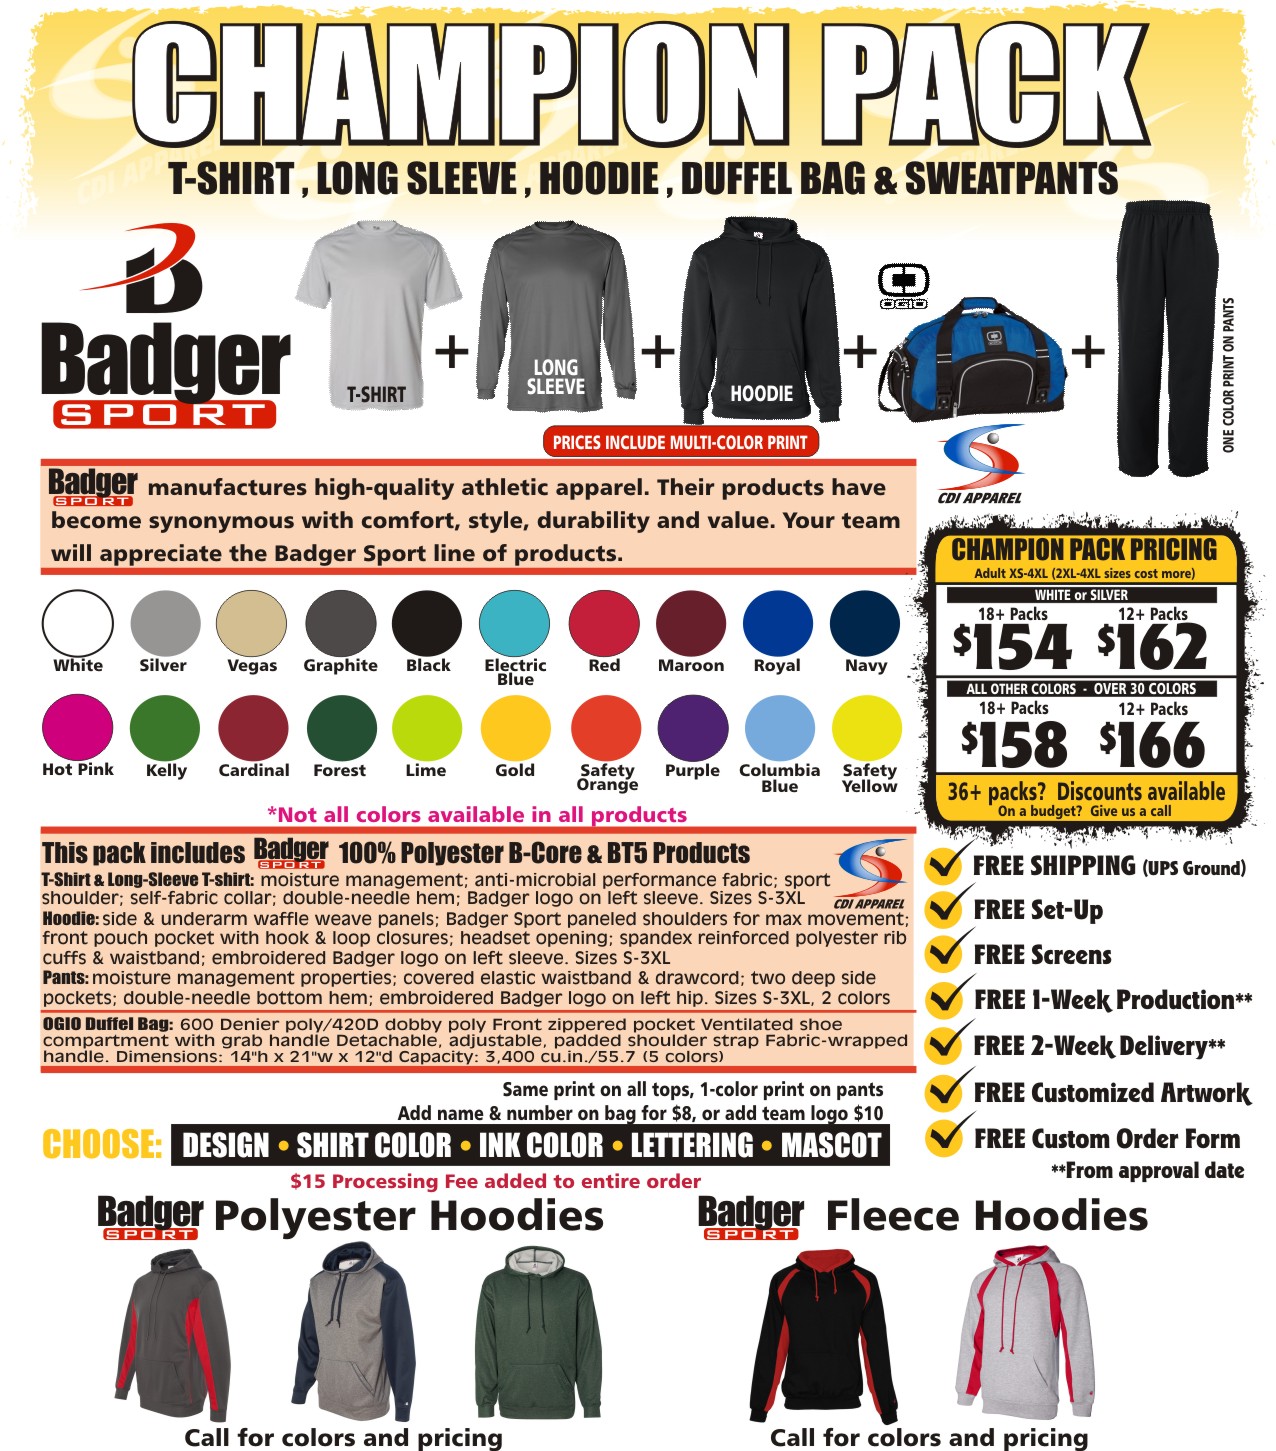 Have-it-All Pack (Champion) Baseball 2017 Badger